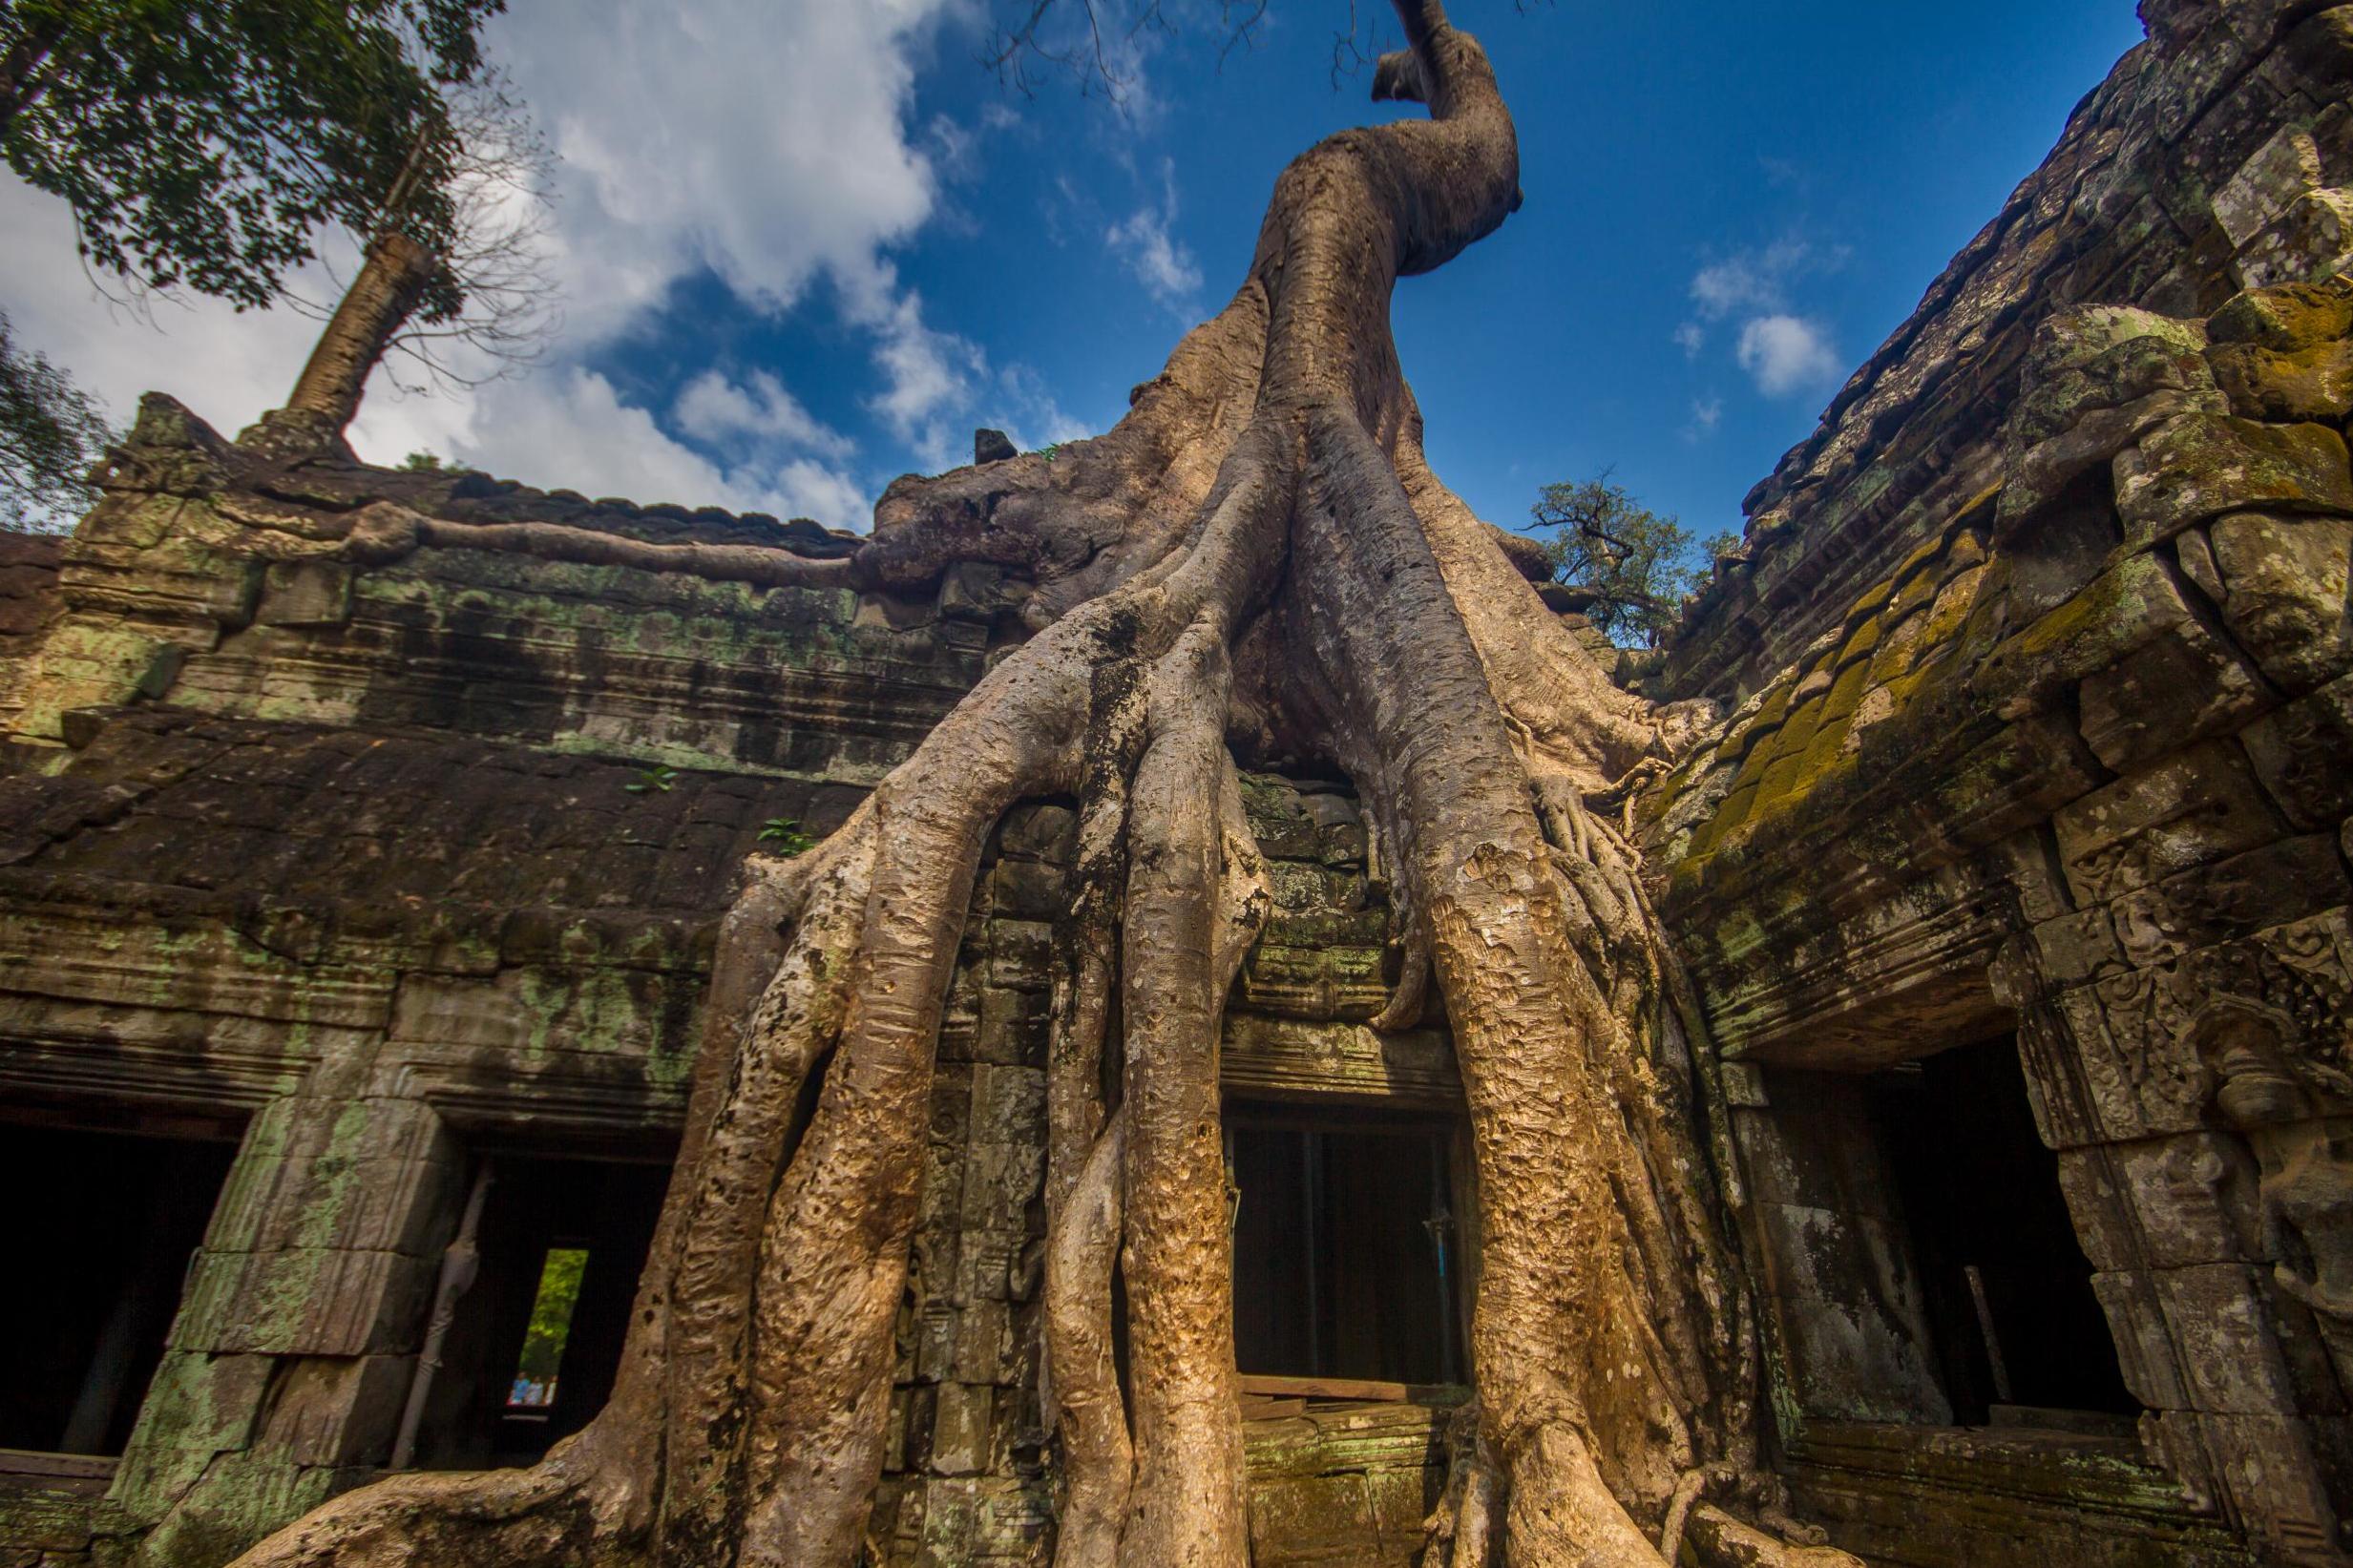 Stop off at the Ta Prohm temple first thing